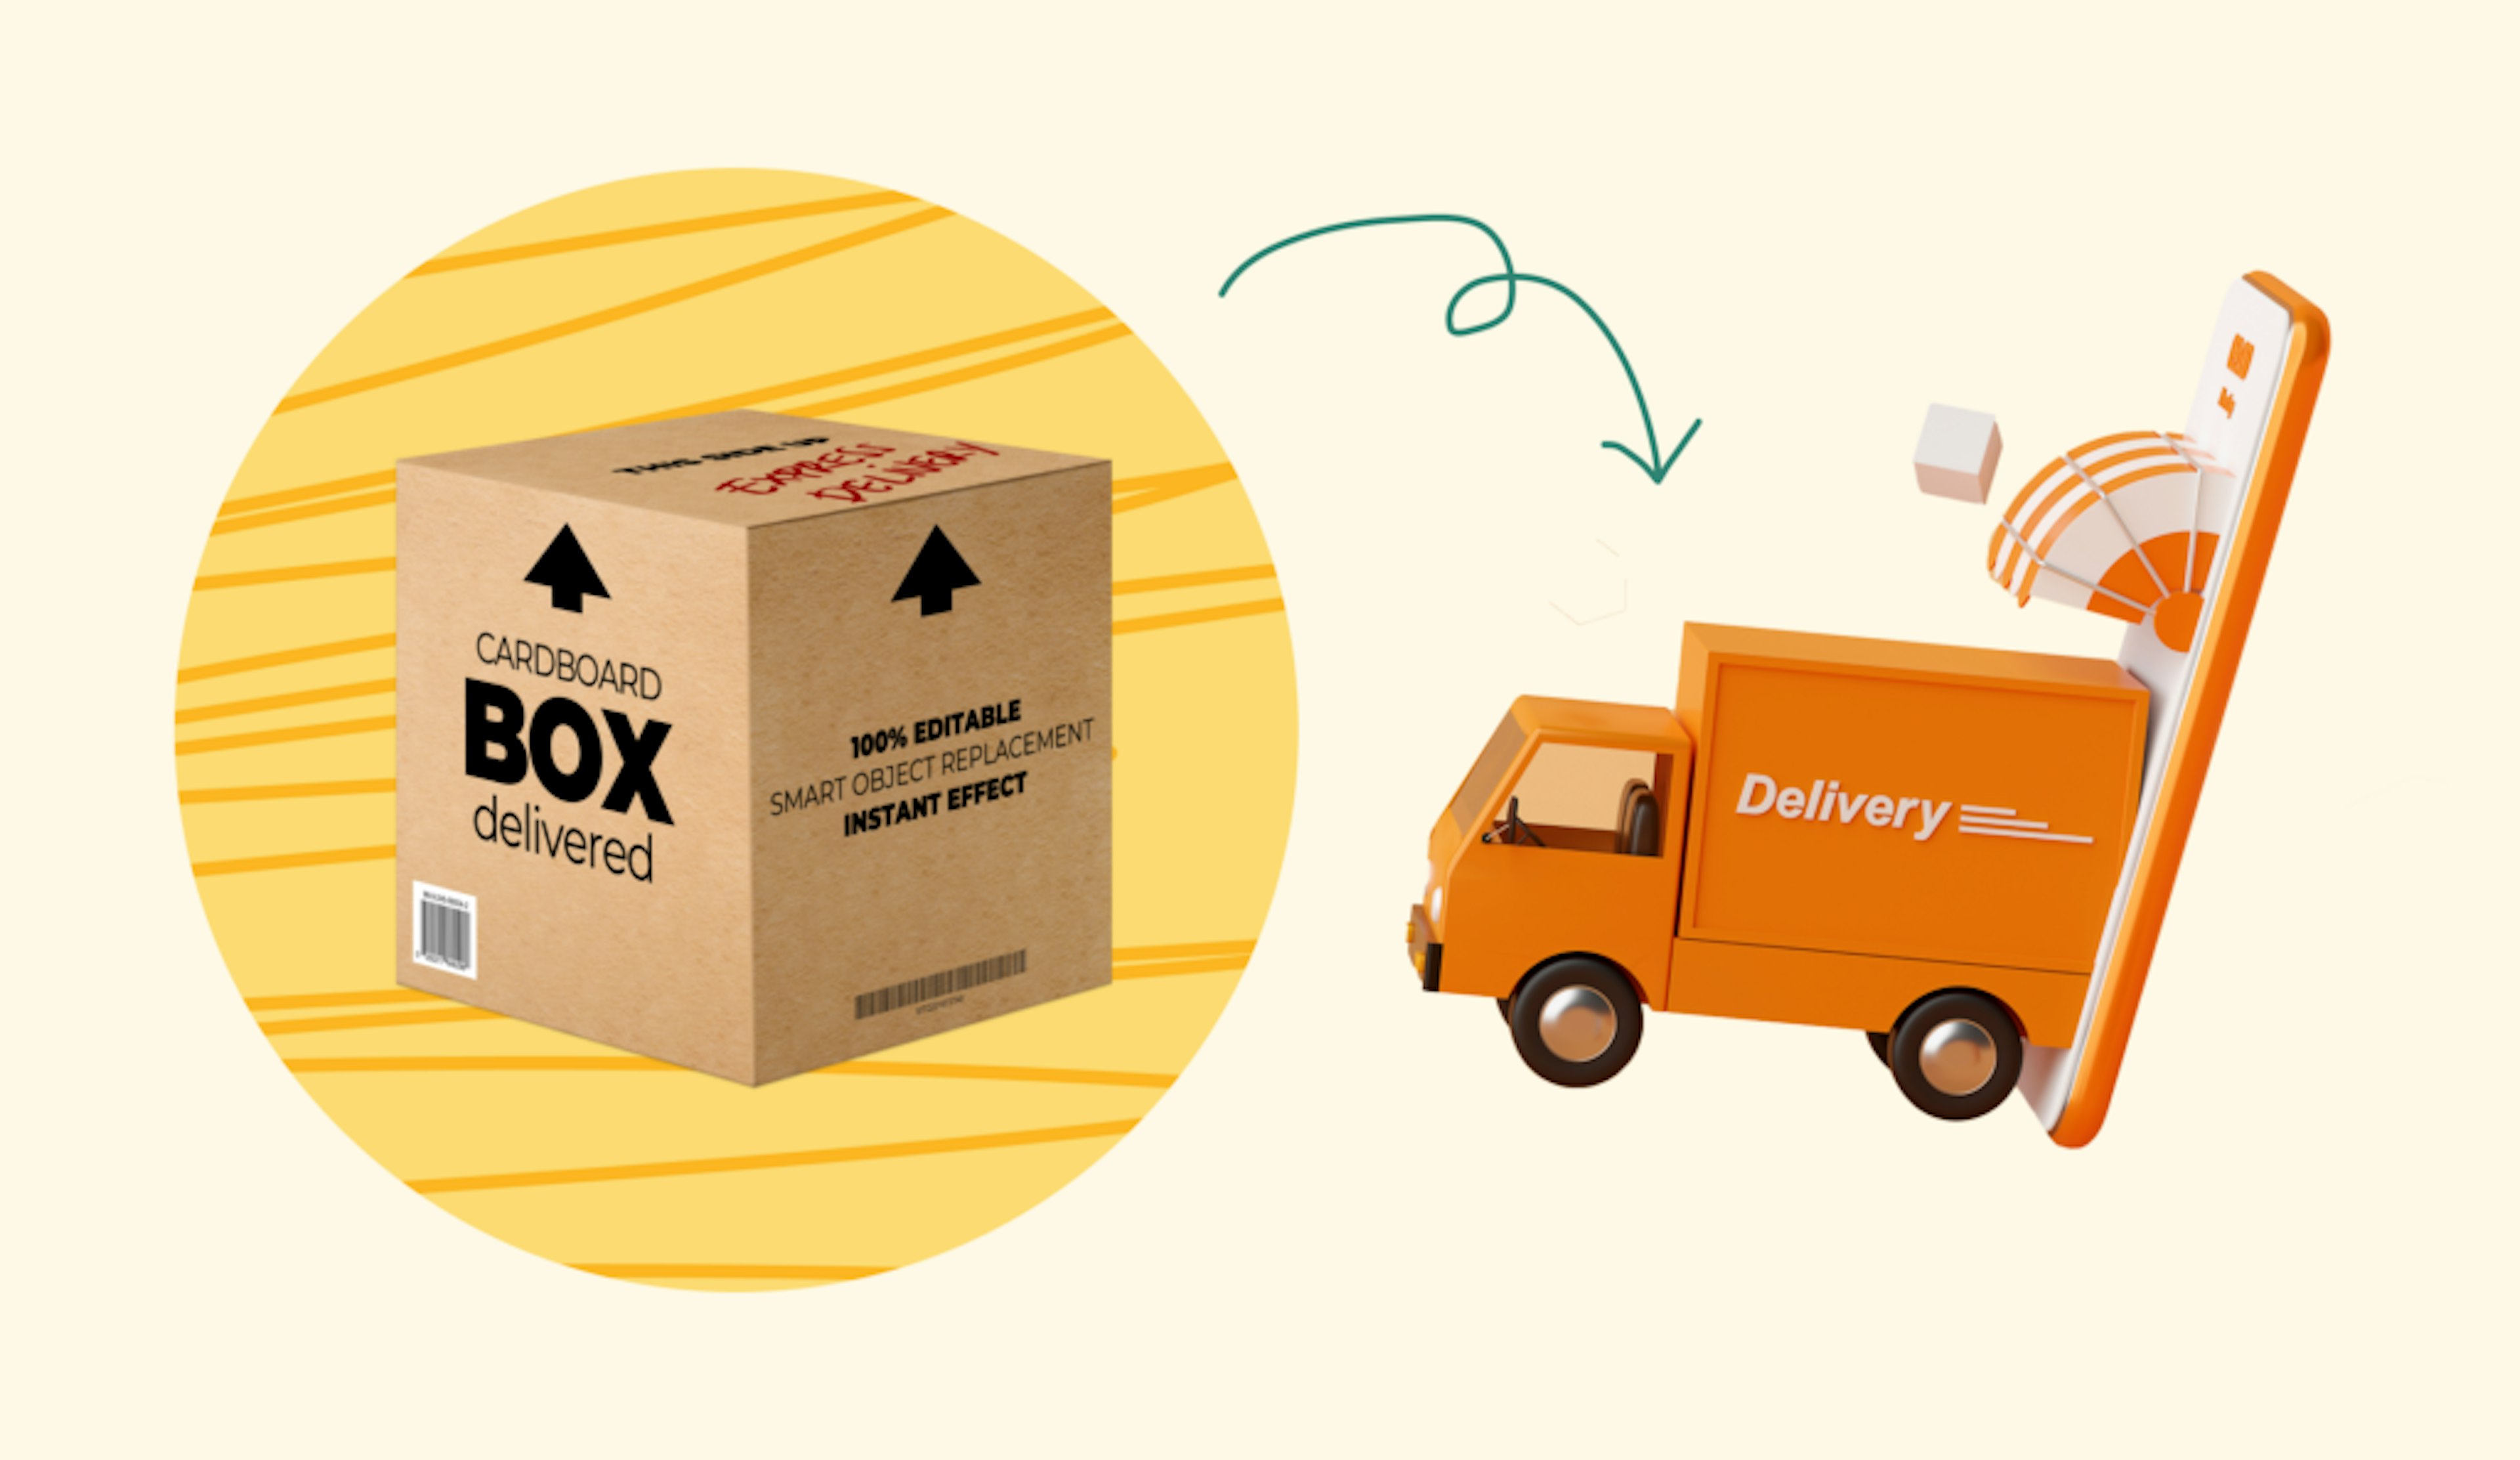 Contract Delivery Jobs: What They Are and Where to Find Them: What is the Difference Between a Delivery Driver and a Courier?